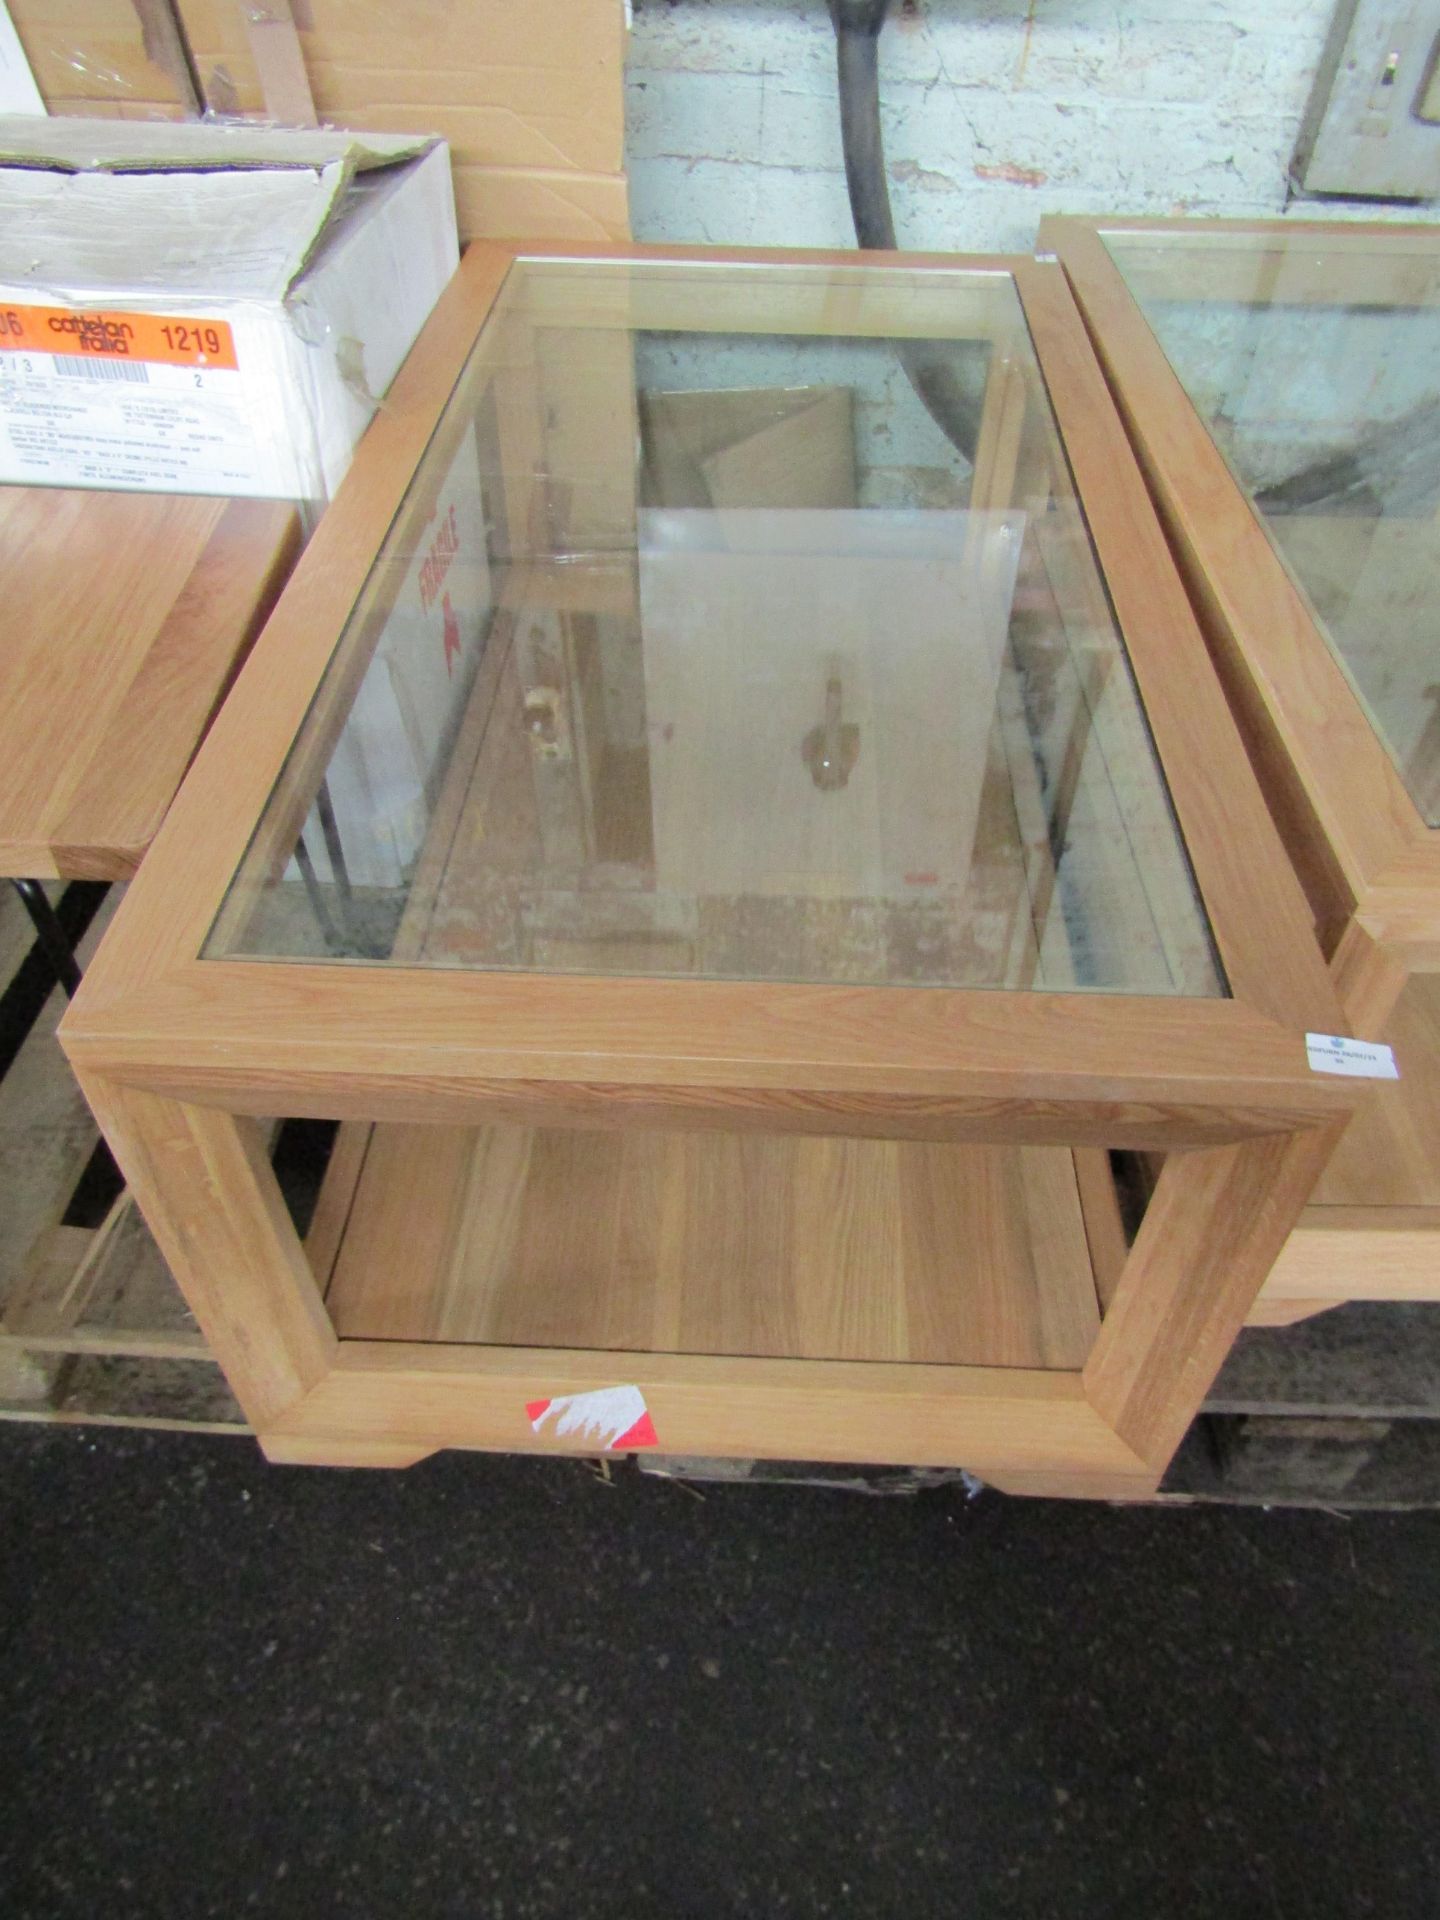 Oak Furnitureland Bevel Natural Solid Oak Glass Topped Coffee Table RRP 279.99 The Bevel Natural